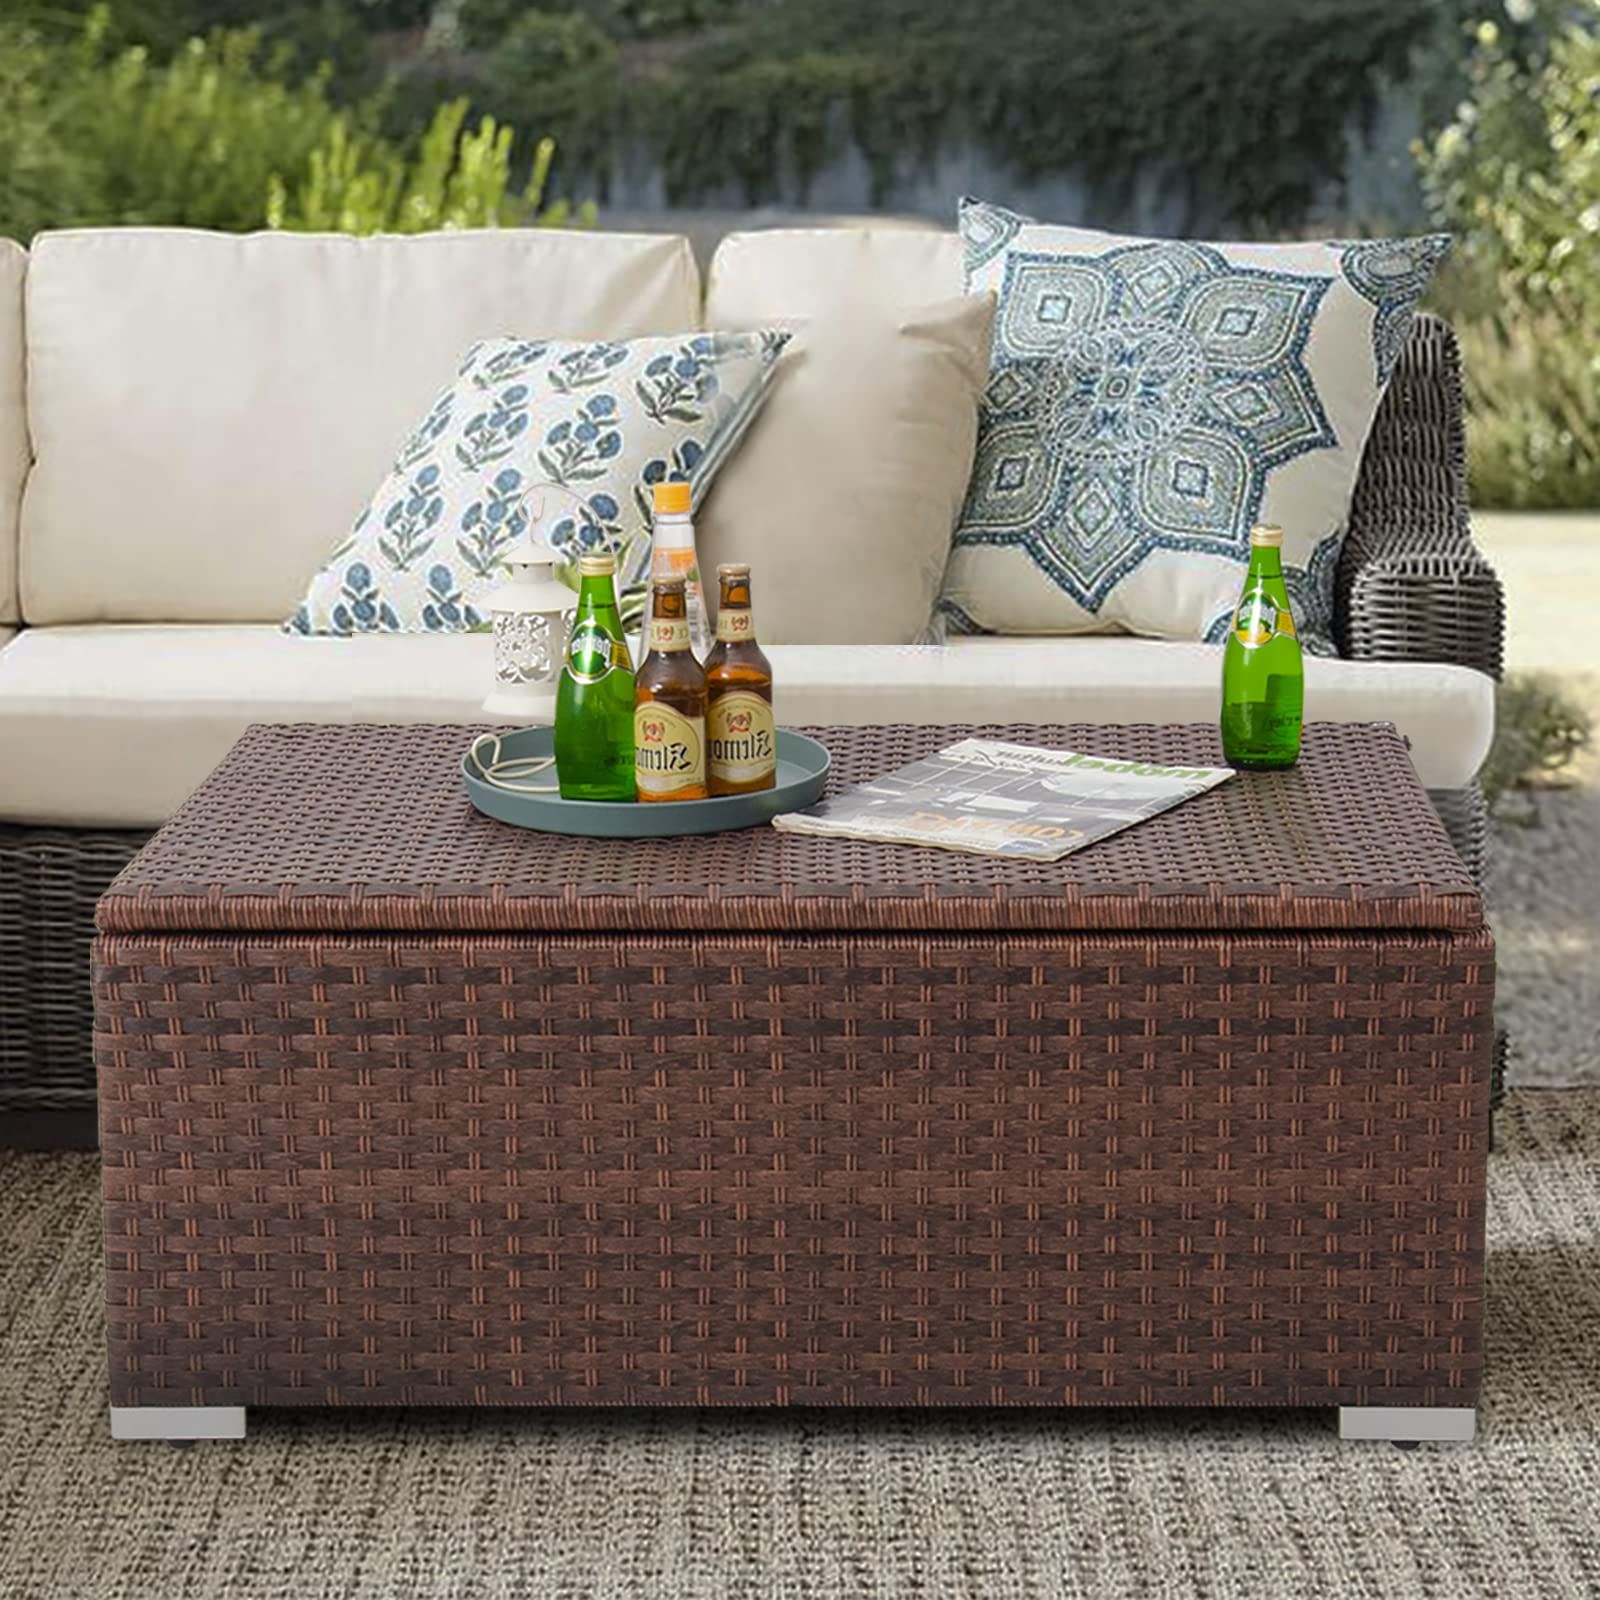 Amazon: Dimar Garden Outdoor Storage Coffee Table With Waterproof Cover, Patio Wicker Storage Table,42 Gallon Mixed Brown : Patio, Lawn & Garden Intended For Recent Storage Table For Backyard, Garden, Porch (View 3 of 15)